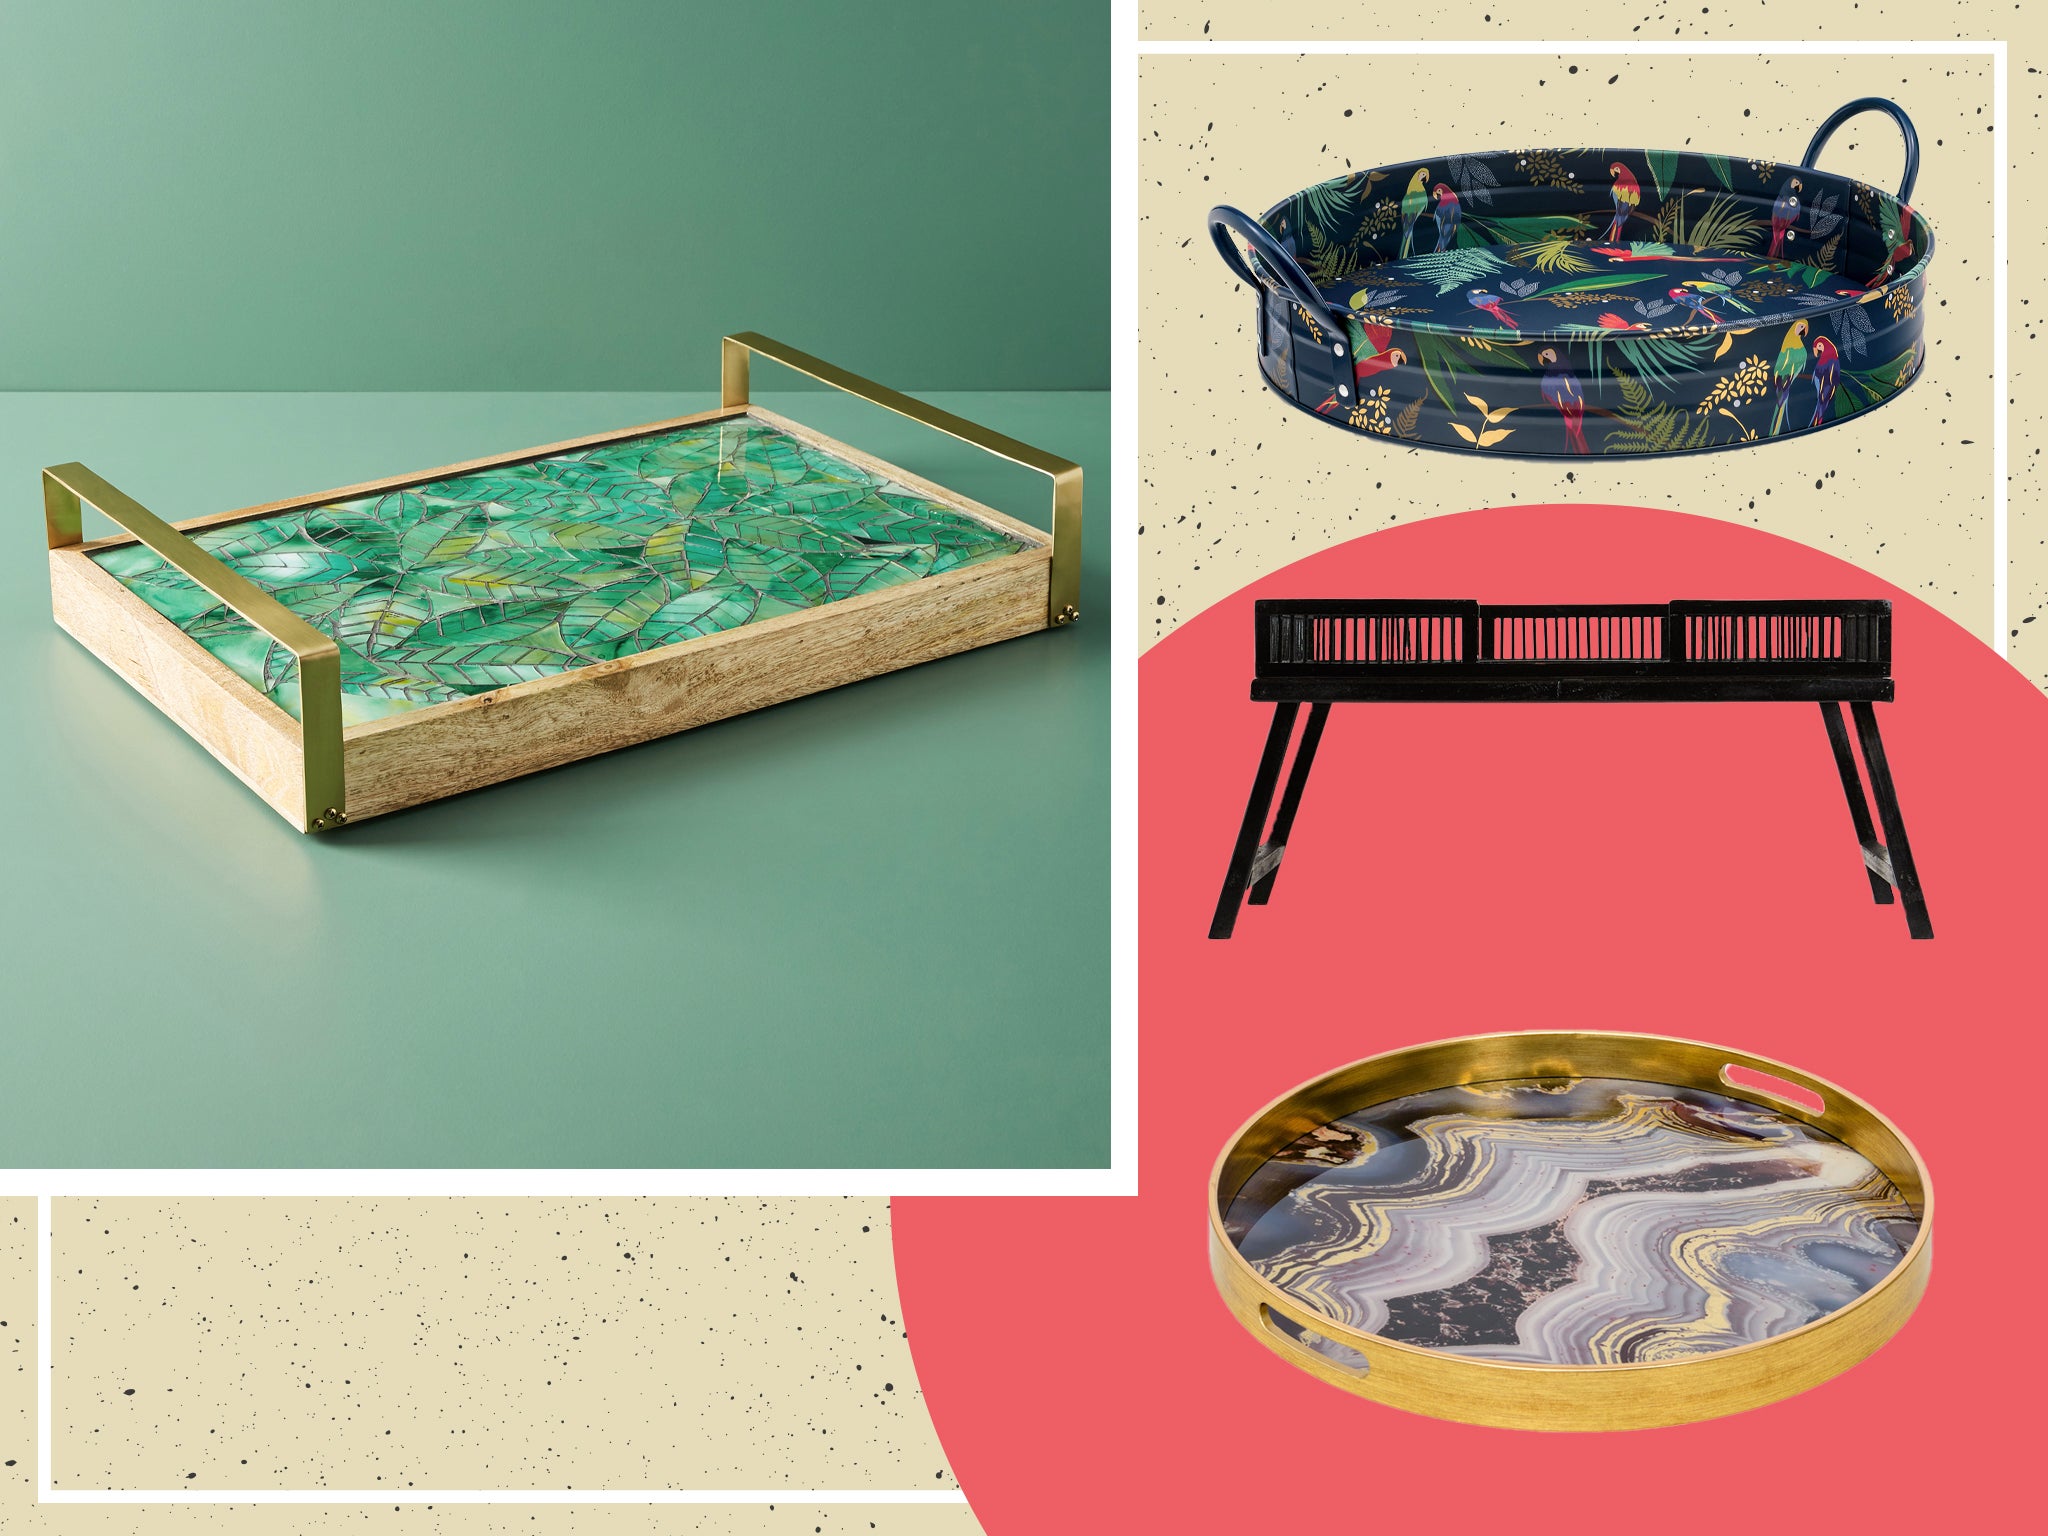 From woven and floral patterned to agate and mirrored designs, there’s something for everyone